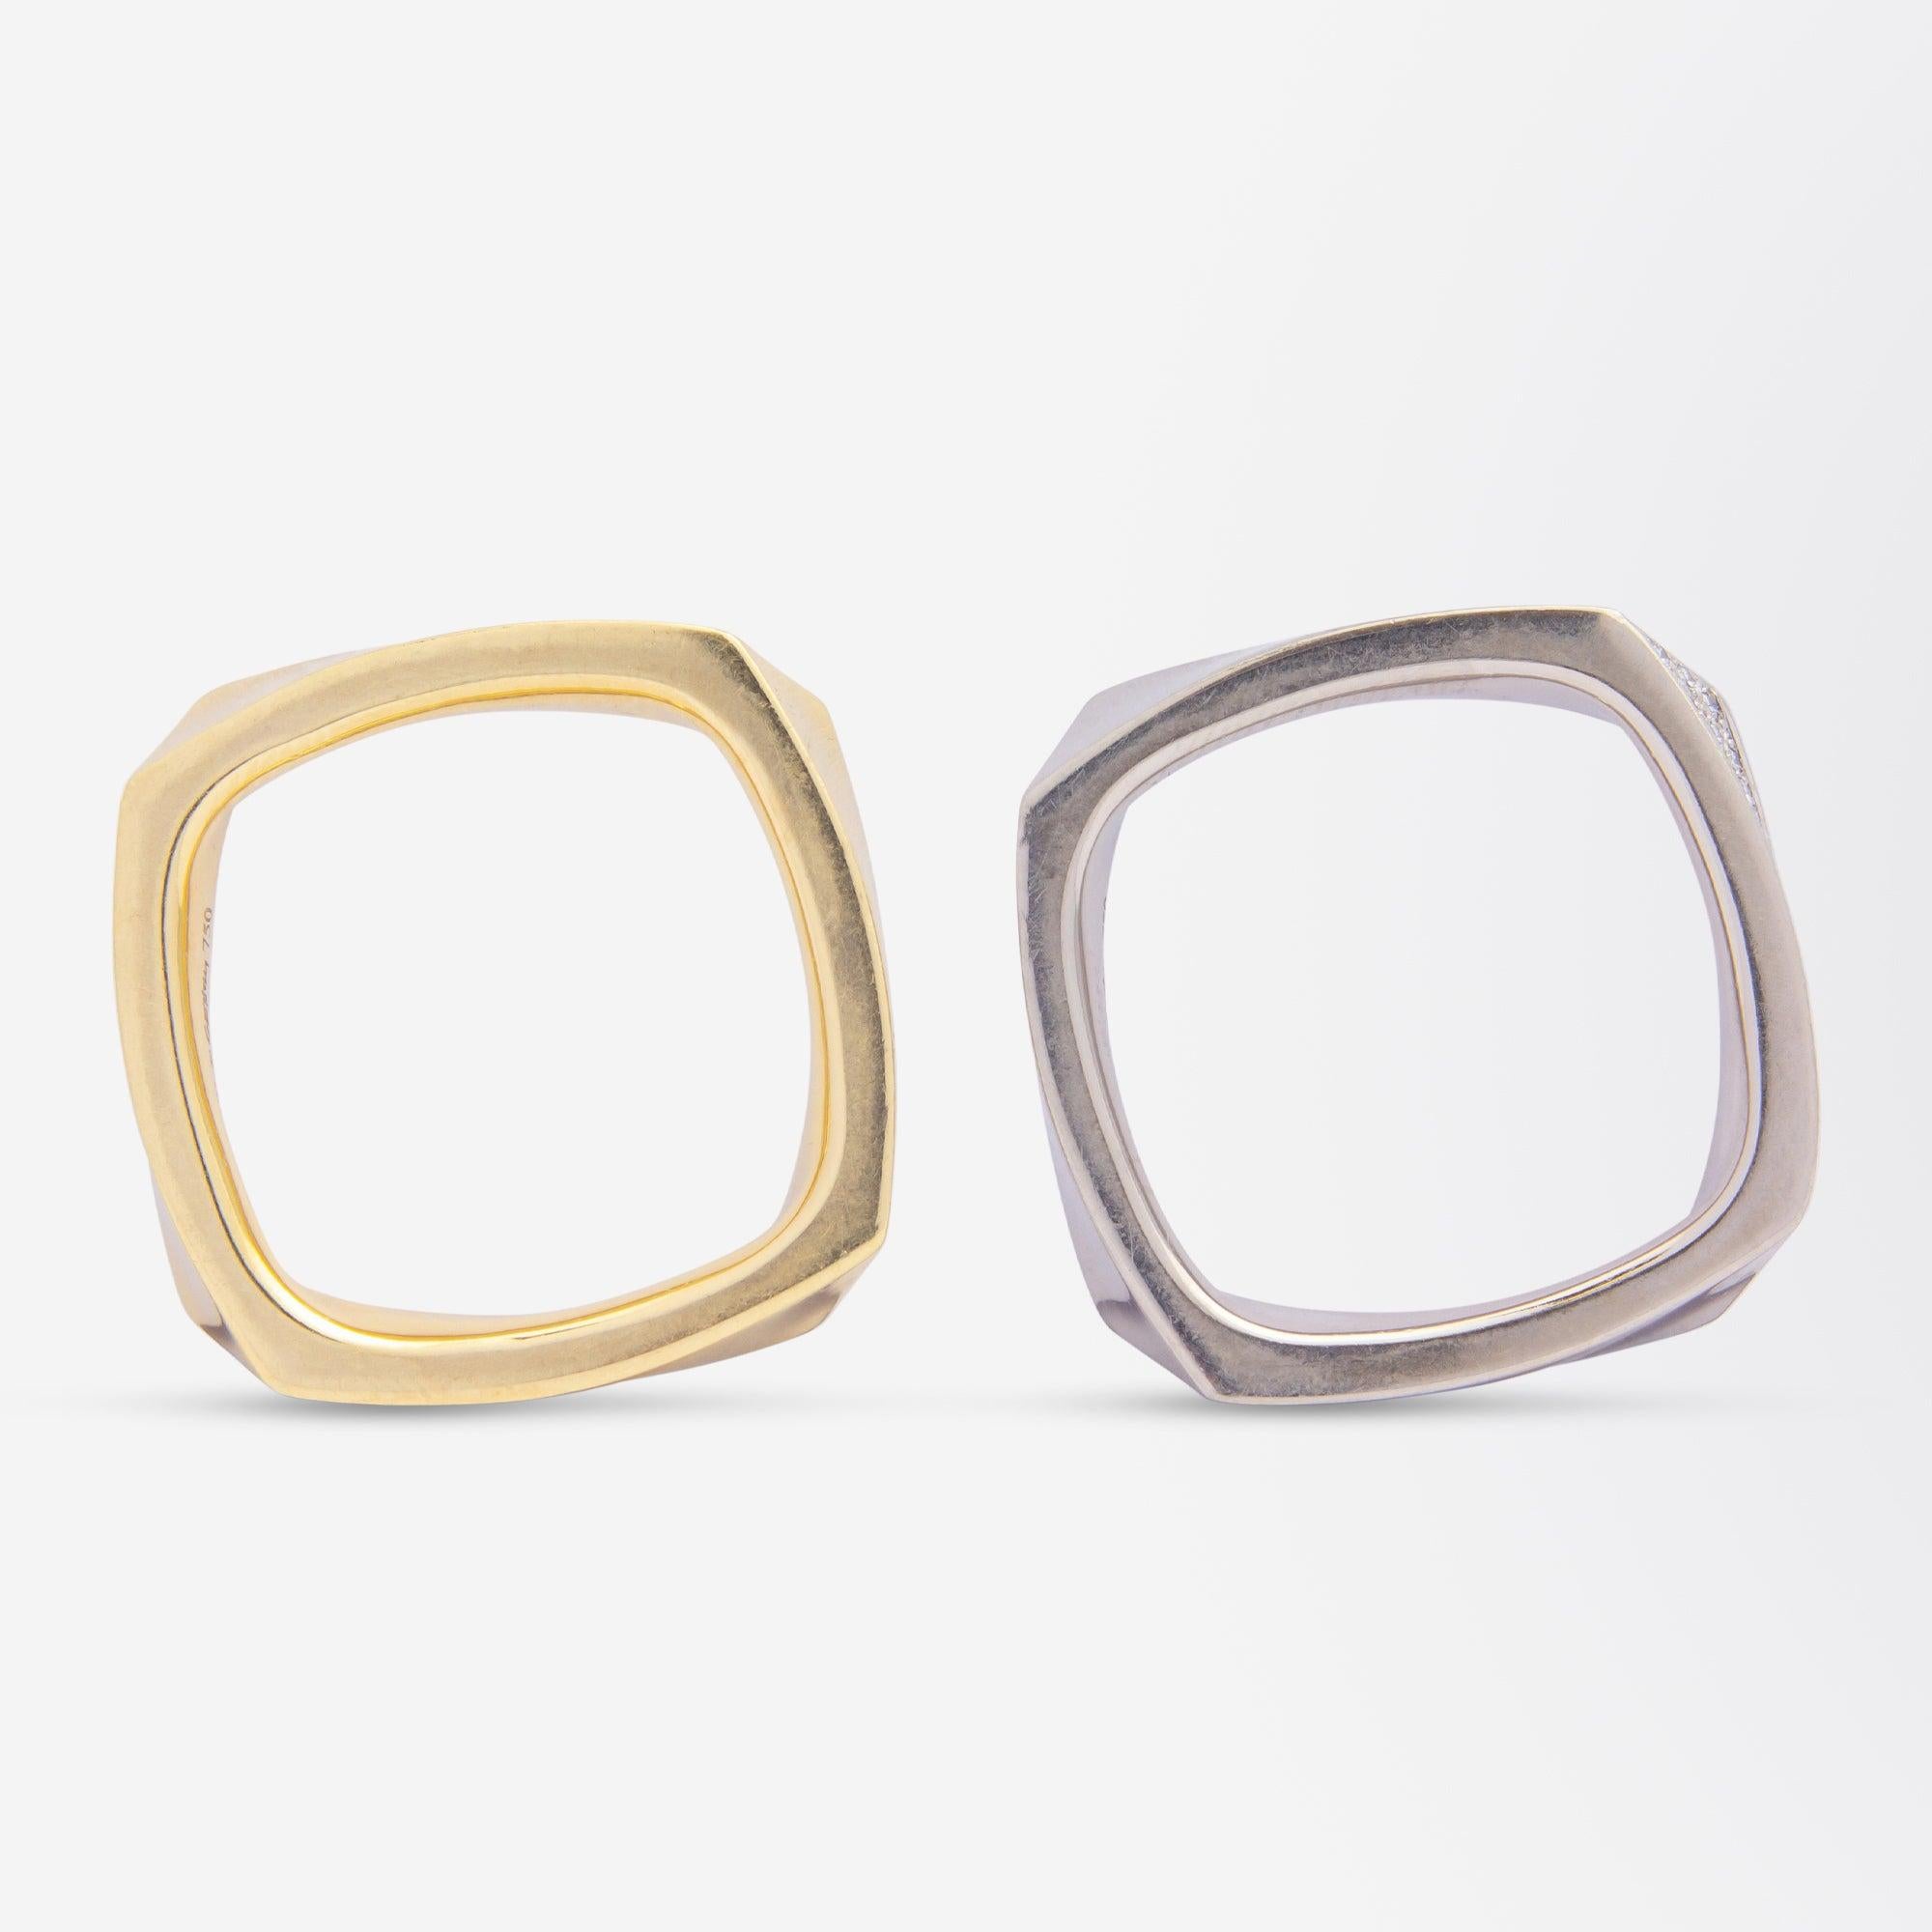 Brilliant Cut Pair of Rings by Frank Gehry for Tiffany & Co